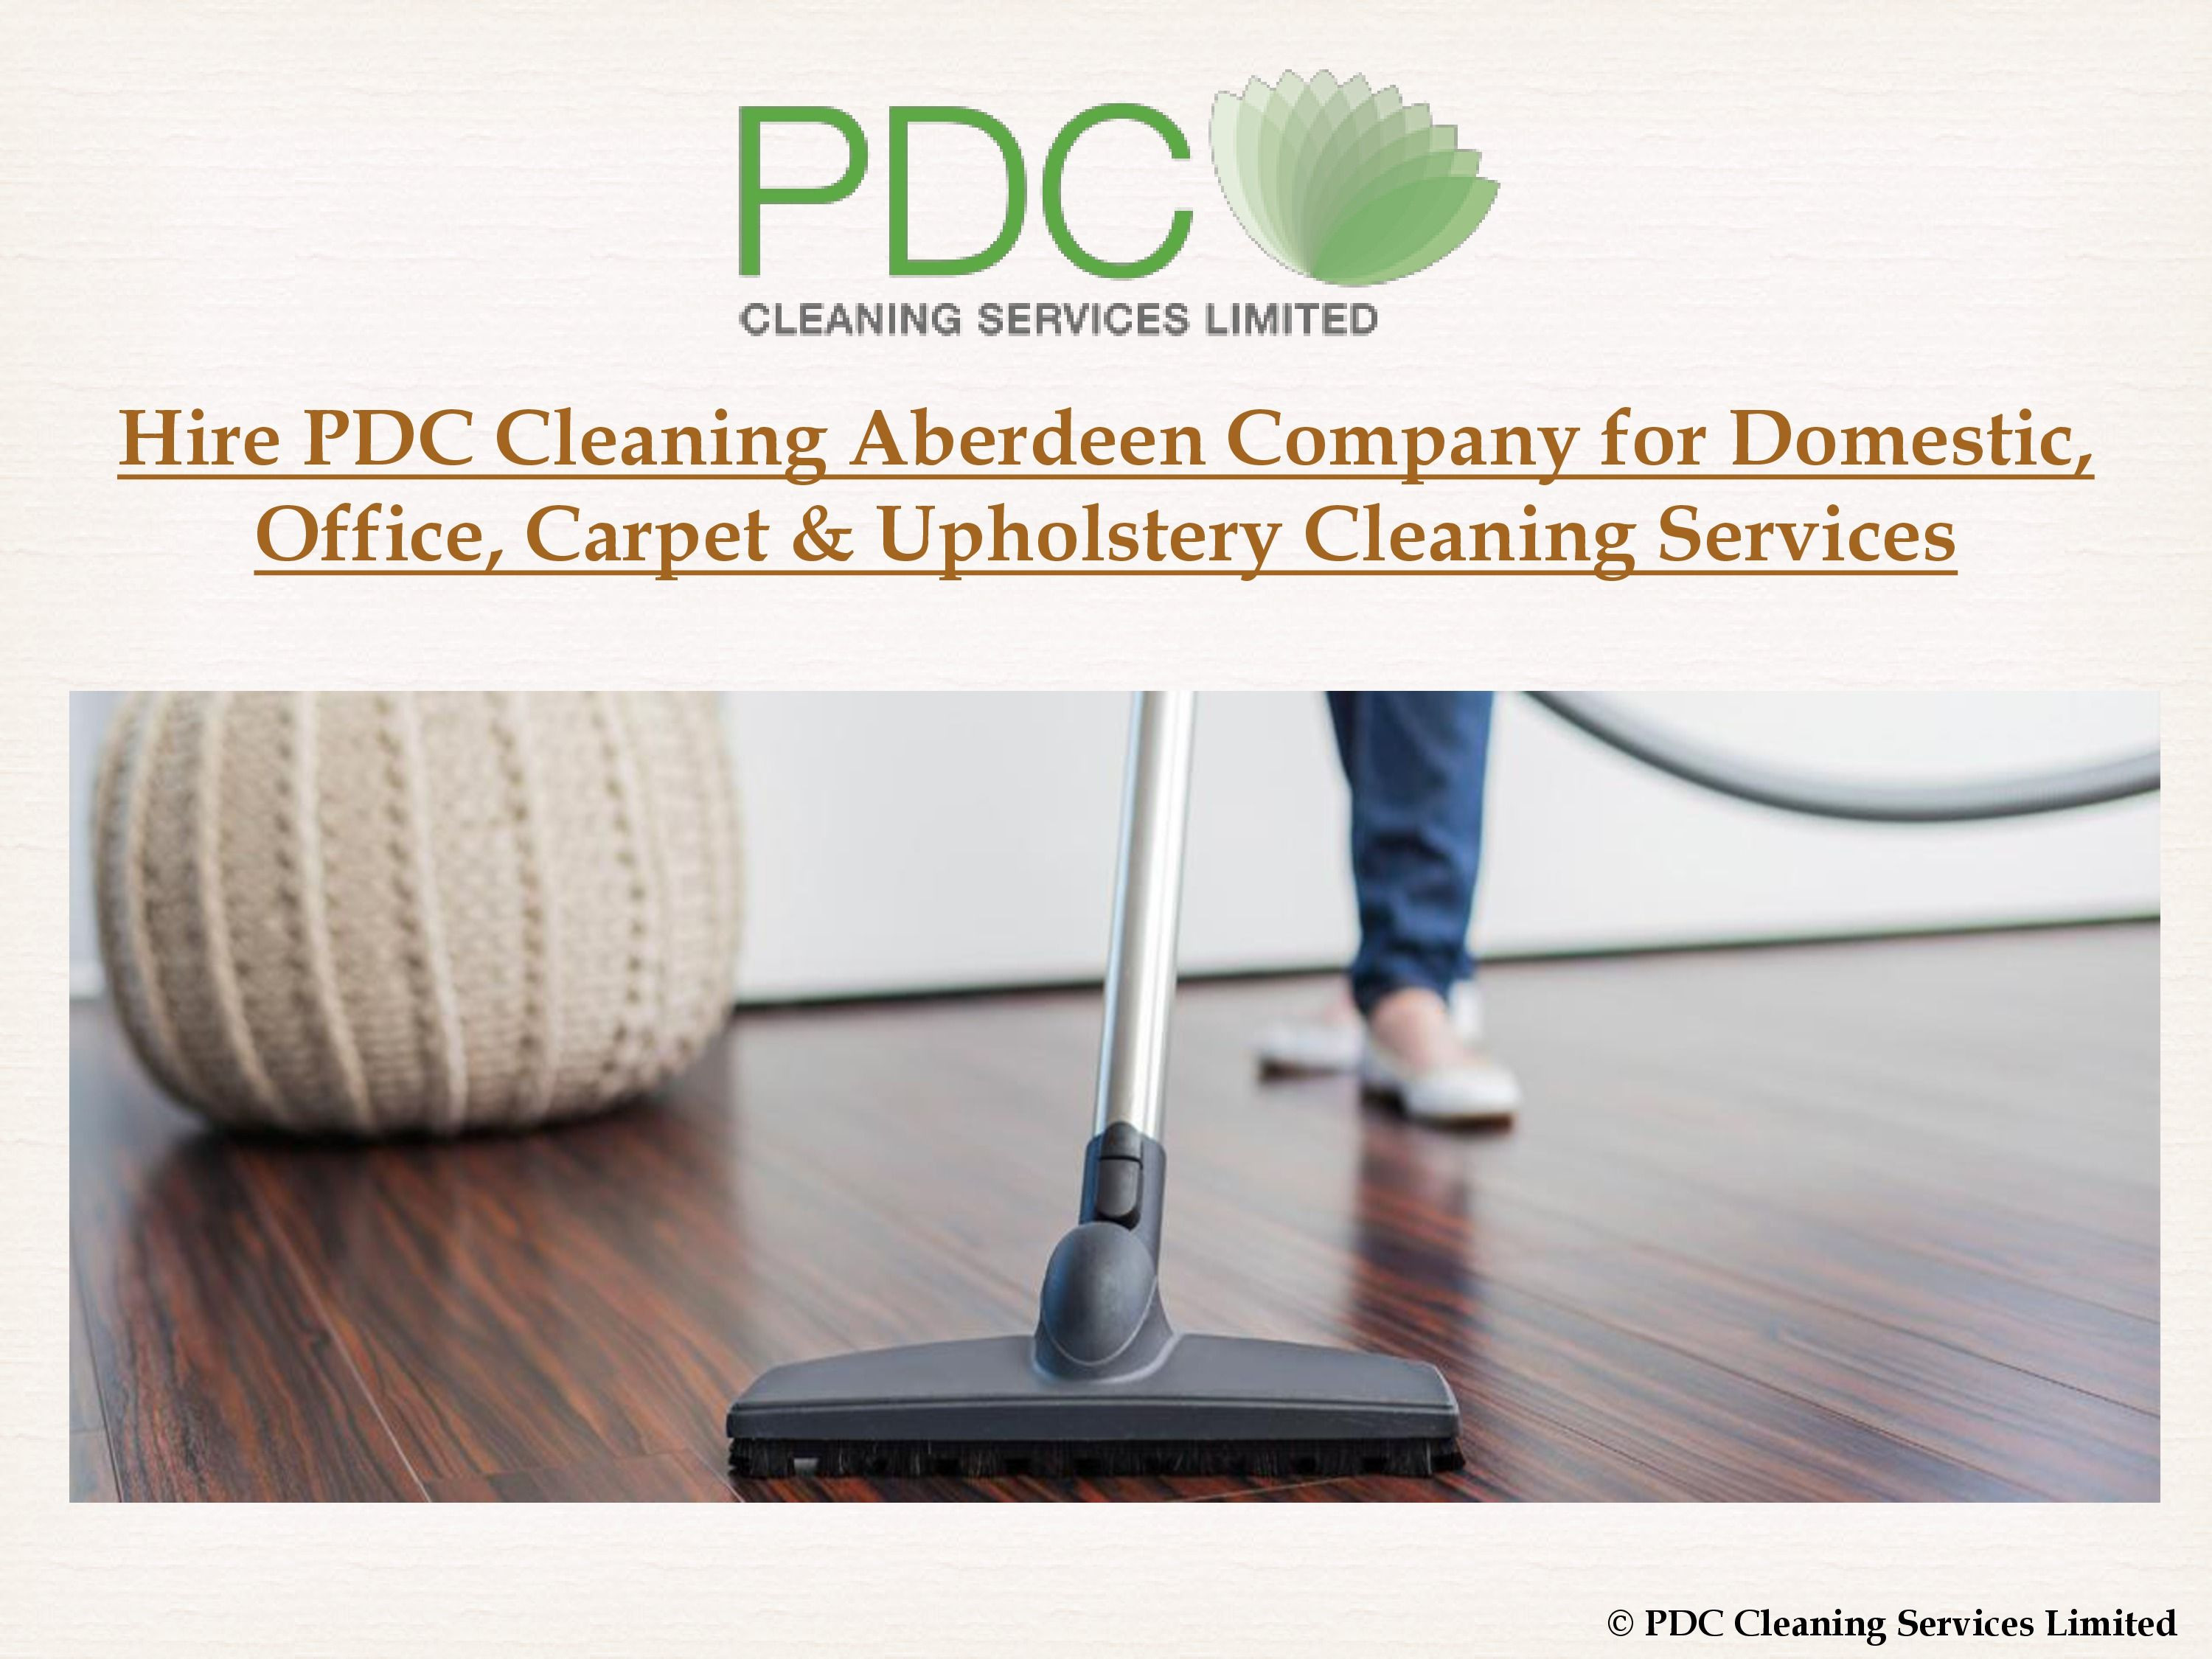 14 Great top Vacuums for Hardwood Floors 2022 free download top vacuums for hardwood floors of cheap and best cleaning services in aberdeen united kingdom are you with best professional home cleaning services offers carpet cleaning upholstery cleanin